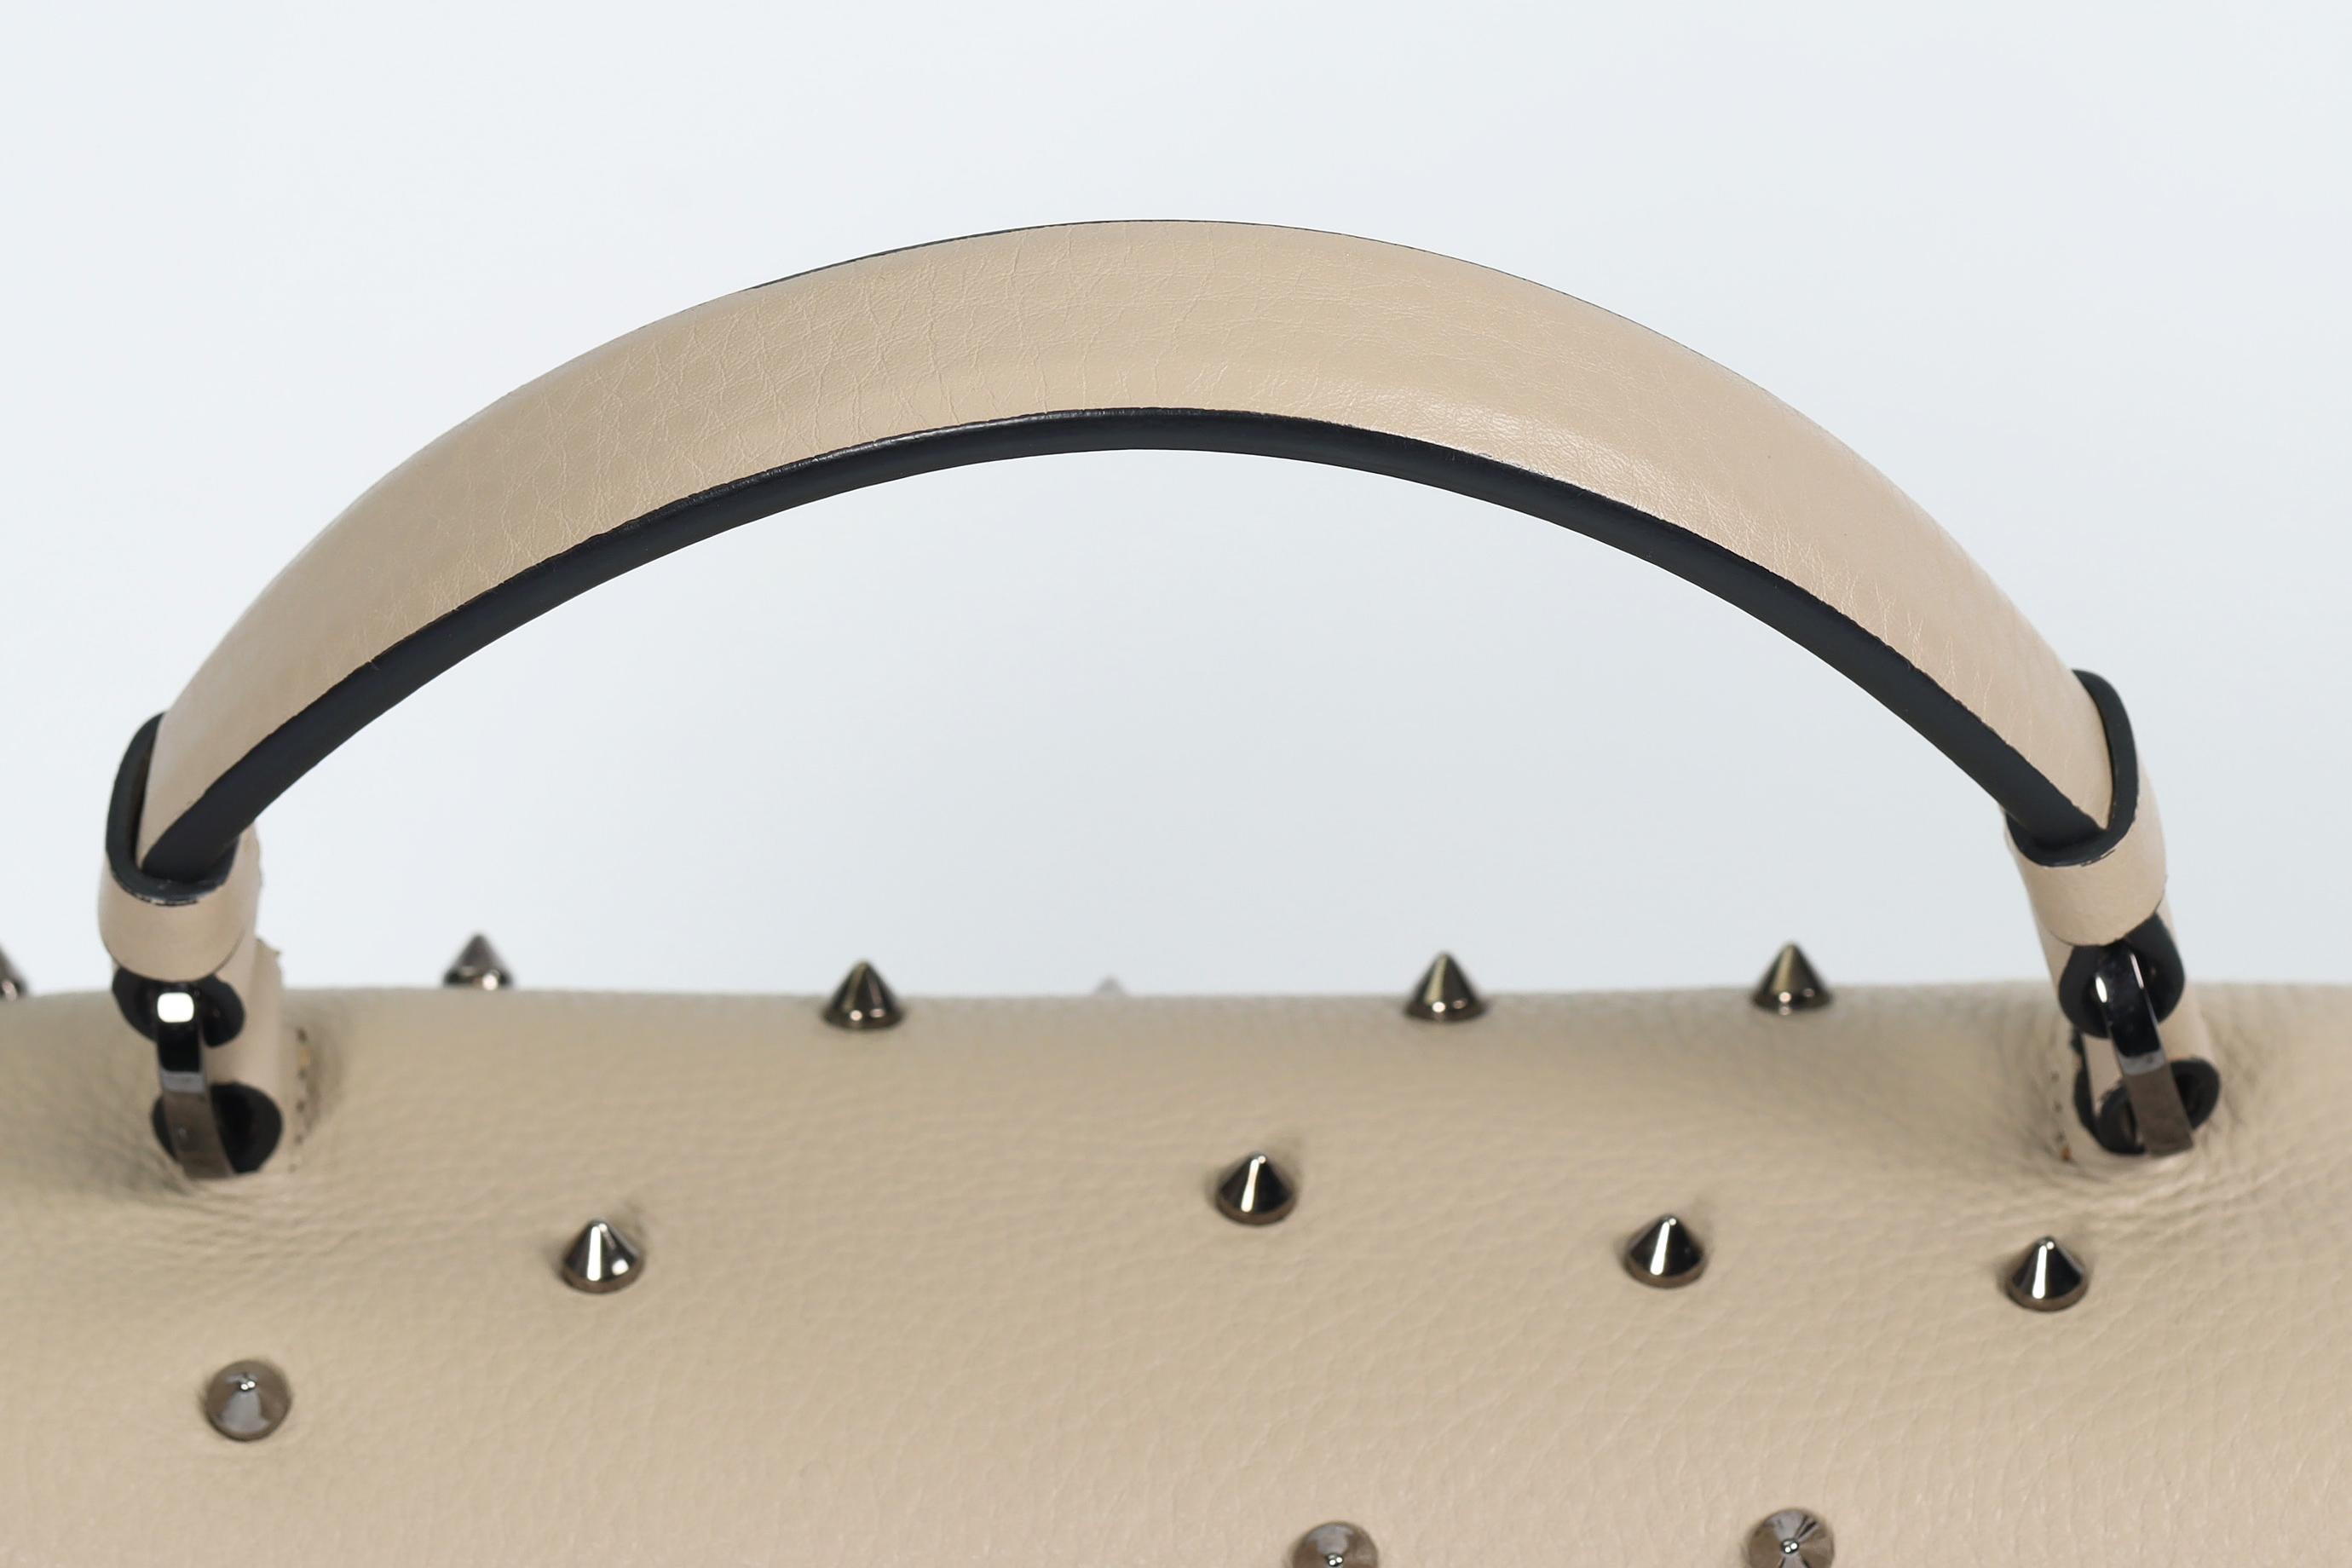 Christian Louboutin Panettone Spiked Leather Shoulder Bag For Sale 5